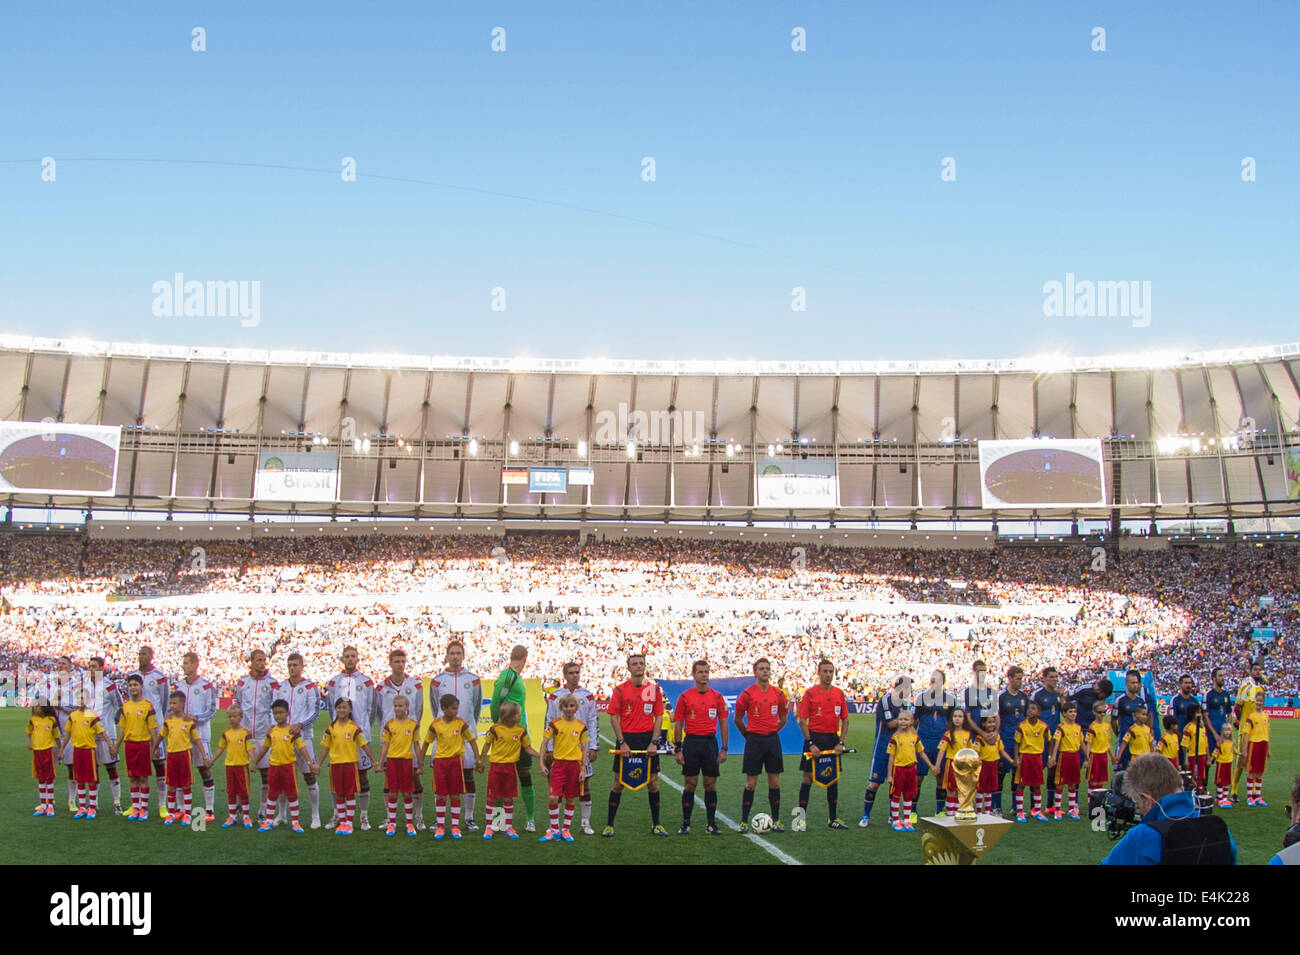 Rio de Janeiro, Brazil. 13th July, 2014. Two team group Football/Soccer : FIFA World Cup Brazil 2014 Final match between Germany 1-0 Argentina at the Maracana stadium in Rio de Janeiro, Brazil . Credit:  Maurizio Borsari/AFLO/Alamy Live News Stock Photo